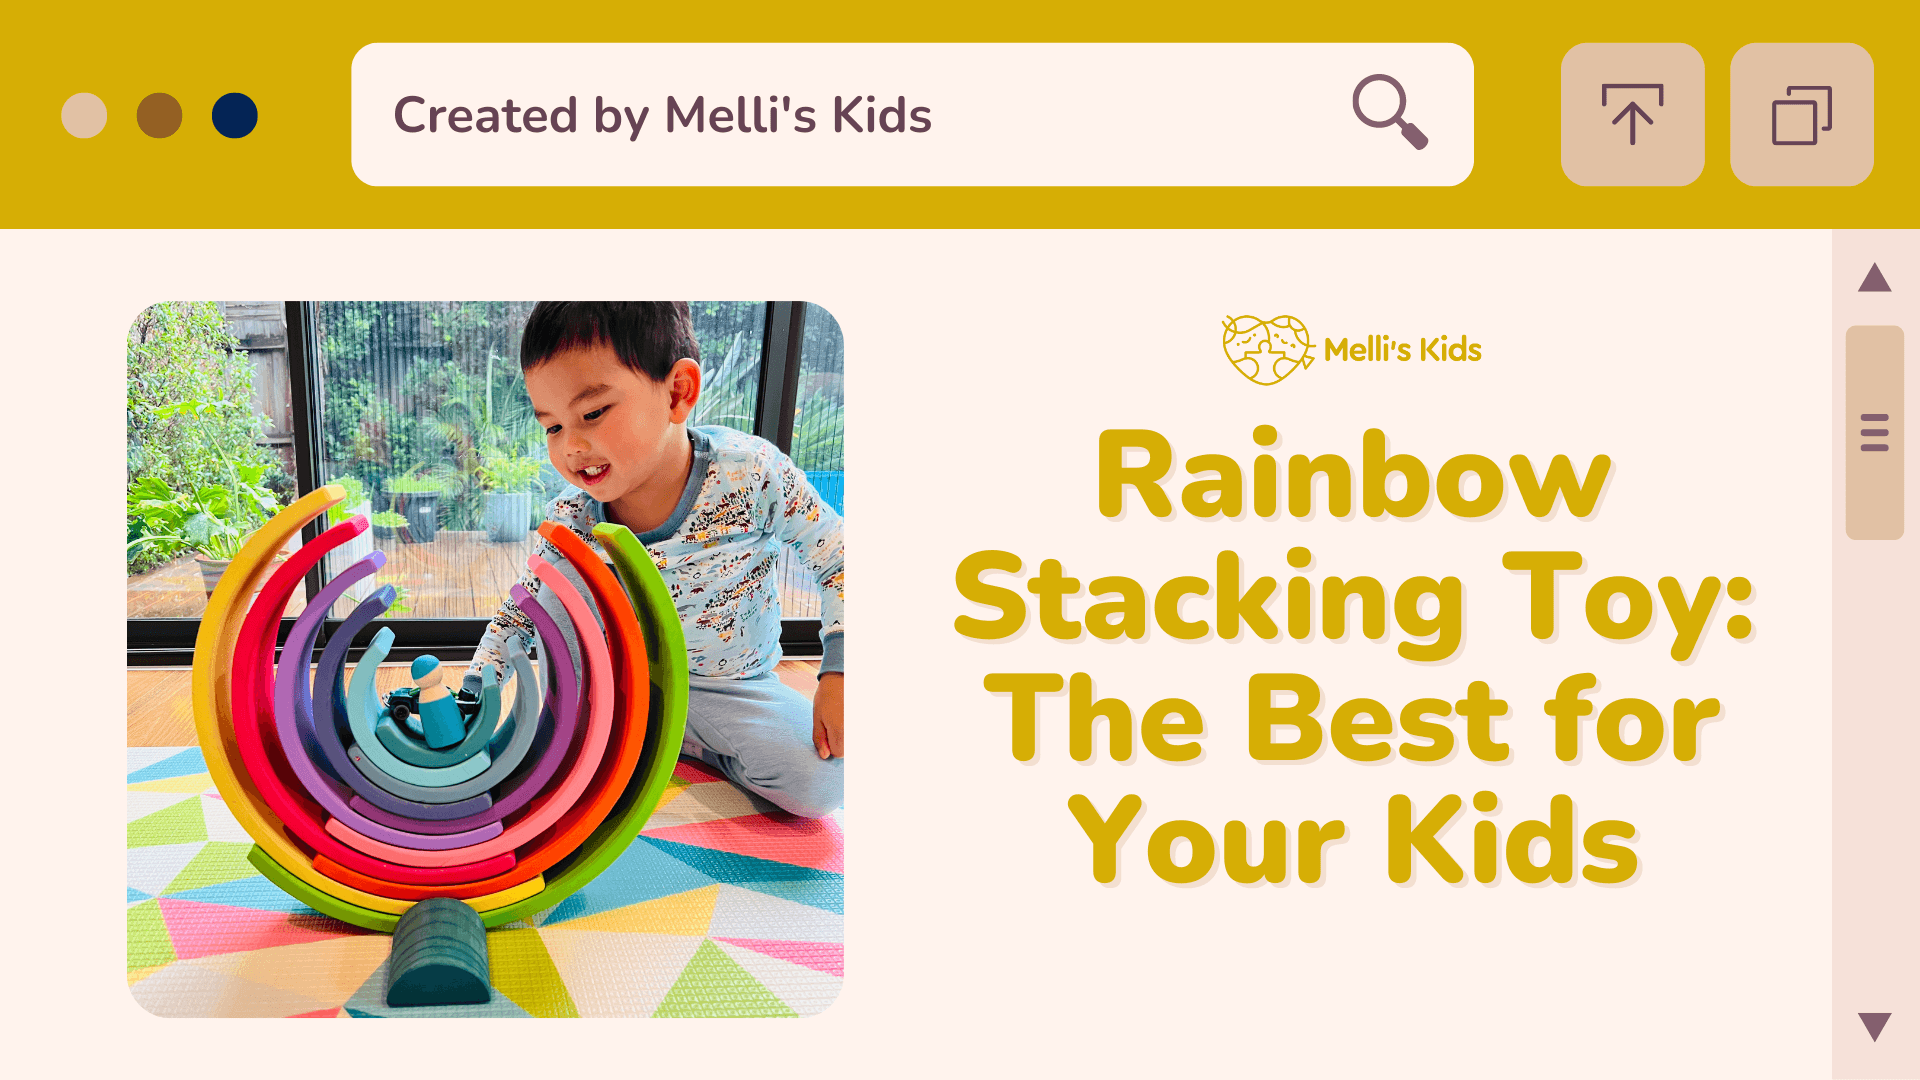 Rainbow stacking toy: The best for your kids